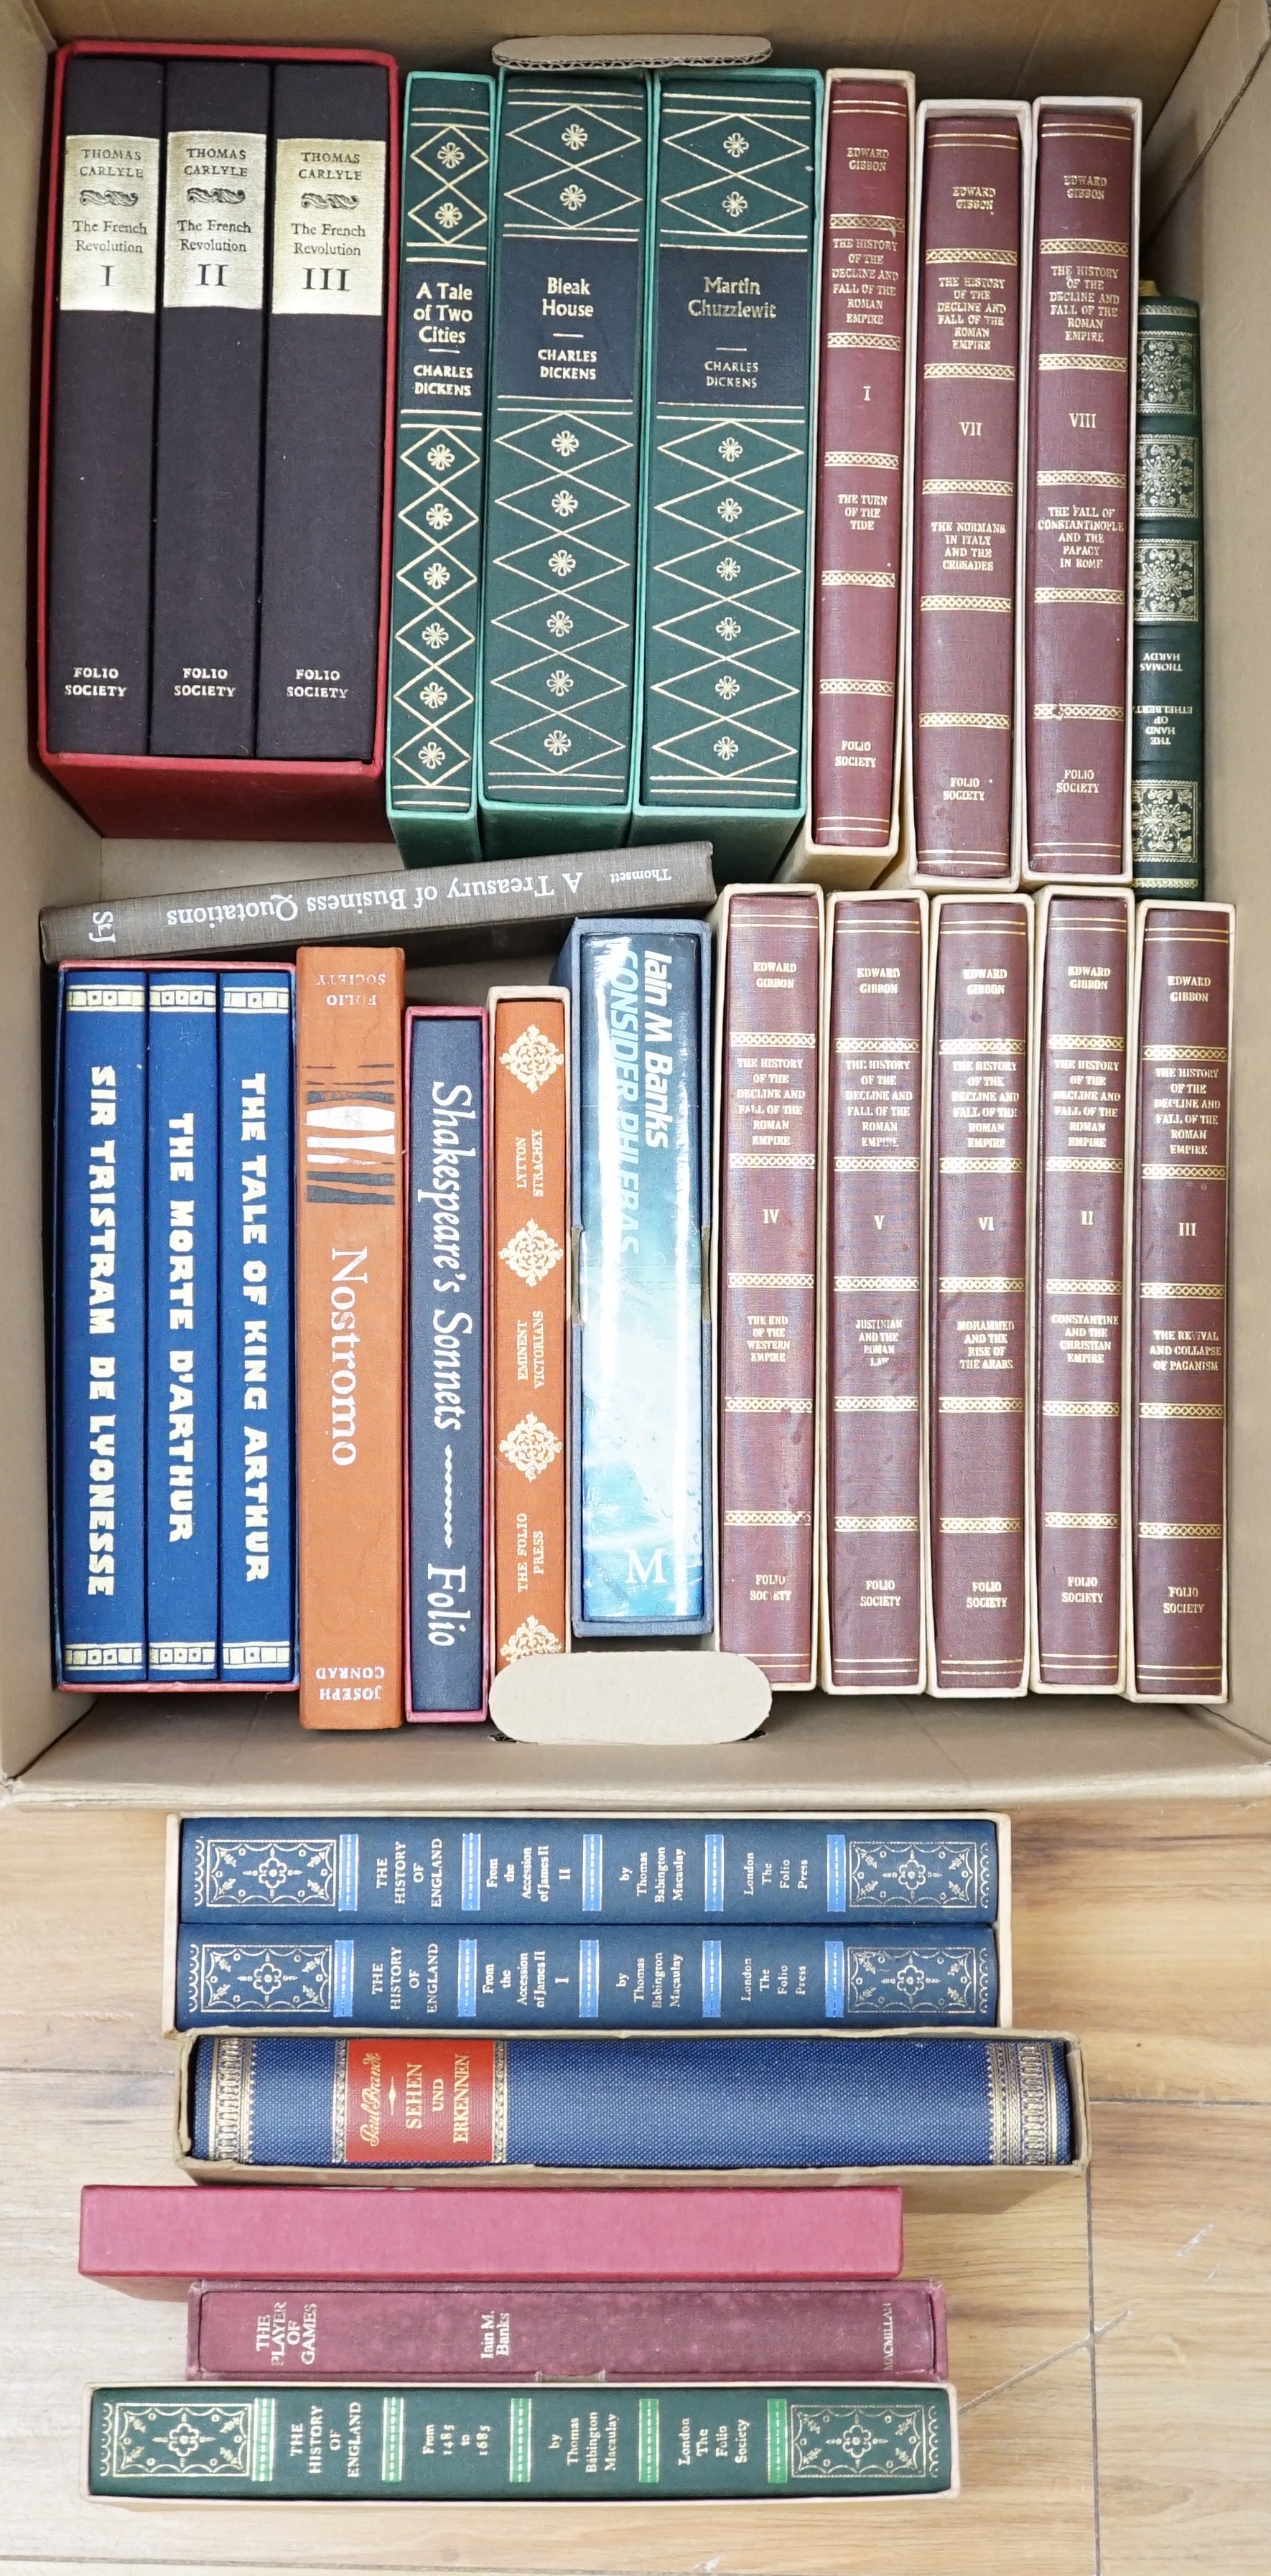 A quantity of mostly fiction Folio Society books including Charles Dickens, some history related and others